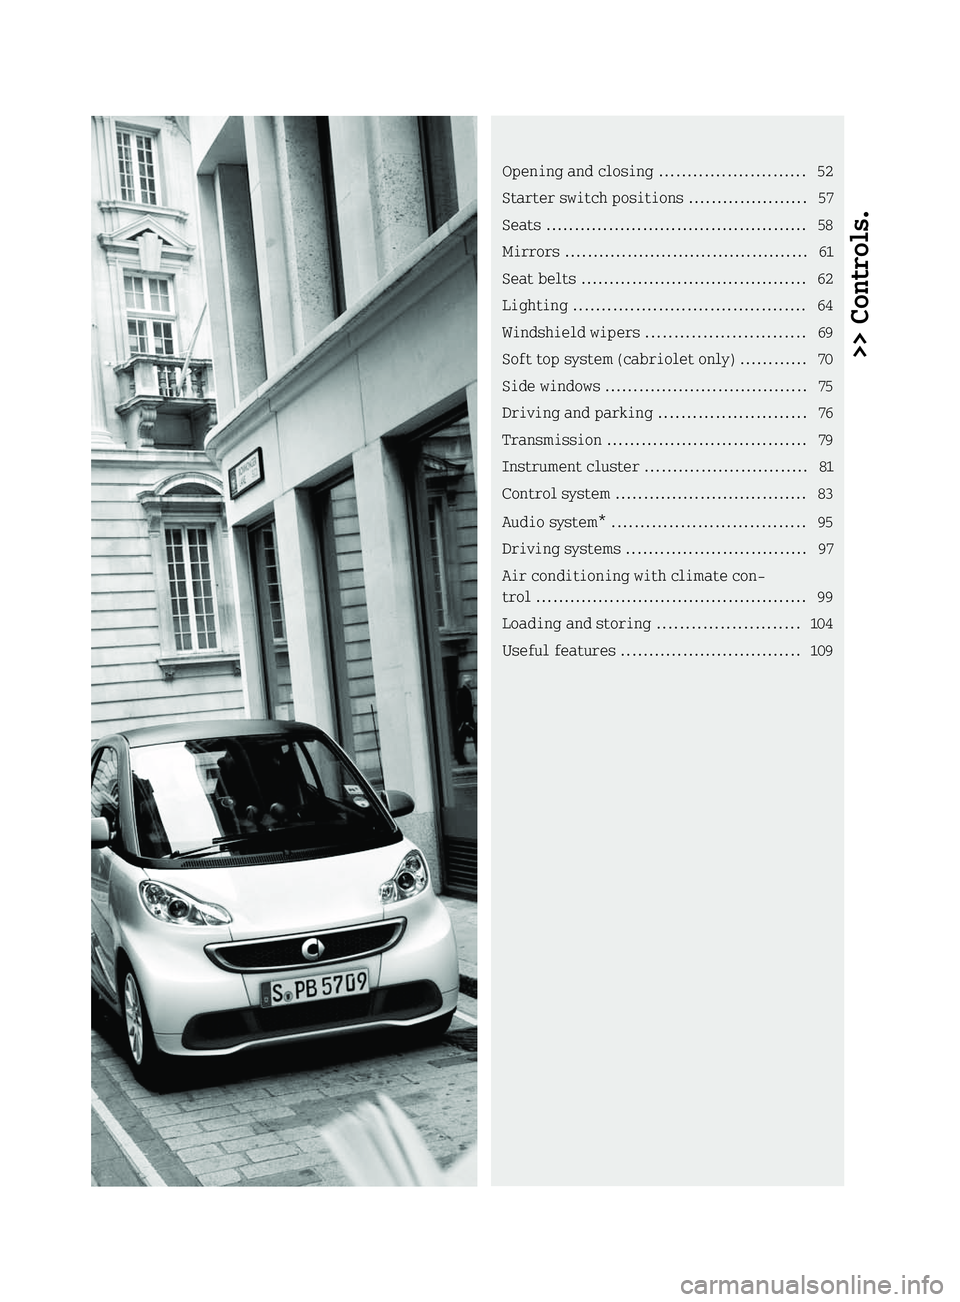 SMART FORTWO COUPE ELECTRIC DRIVE 2014 User Guide >> Controls.Opening and closing
.......................... 52
Starter switch positions .....................57
Seats .............................................. 58
Mirrors .........................